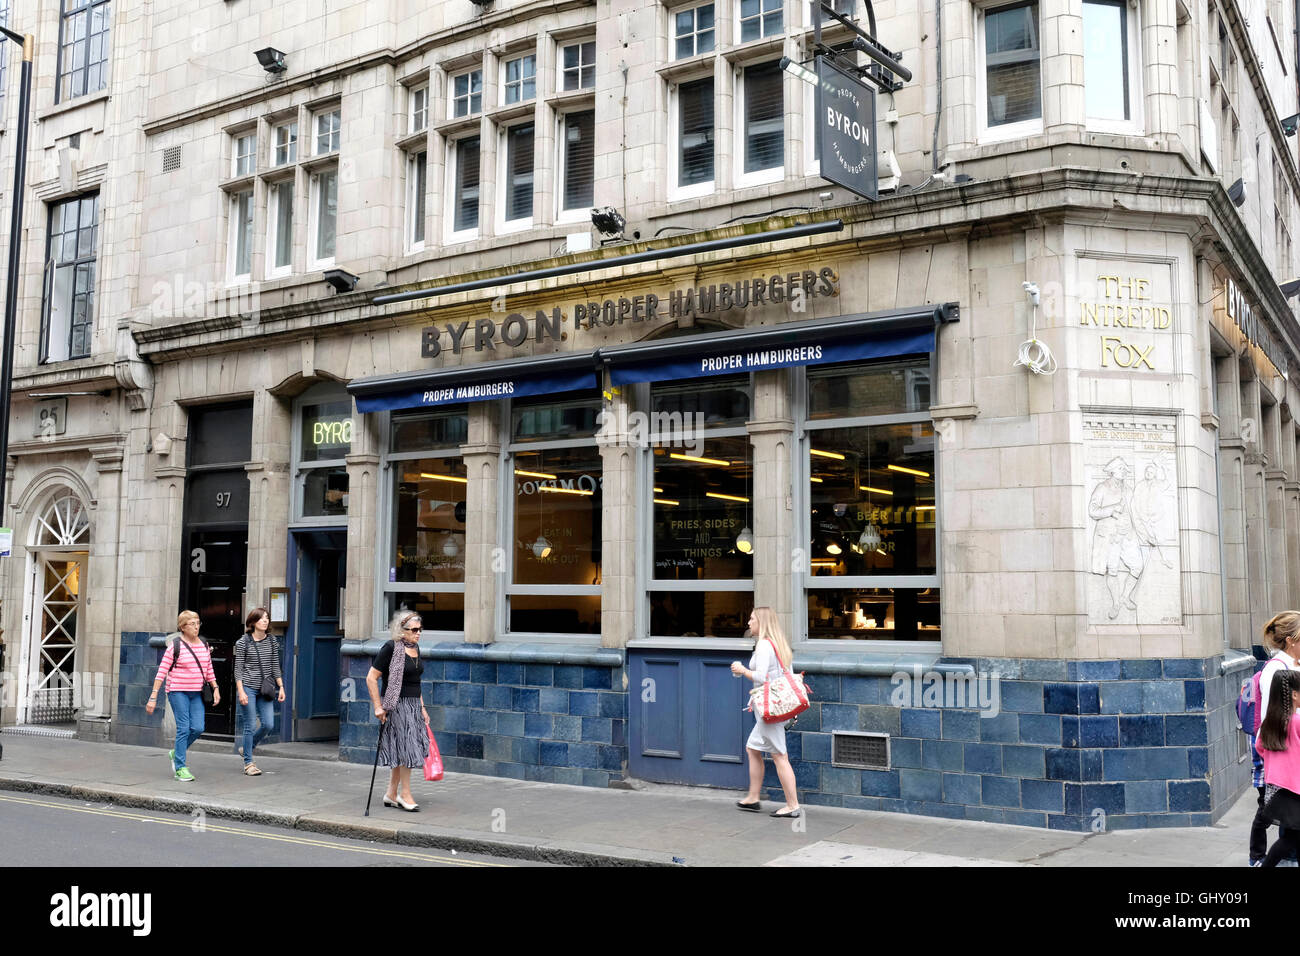 A general view of Byron hamburgers restaurant in central London Stock Photo